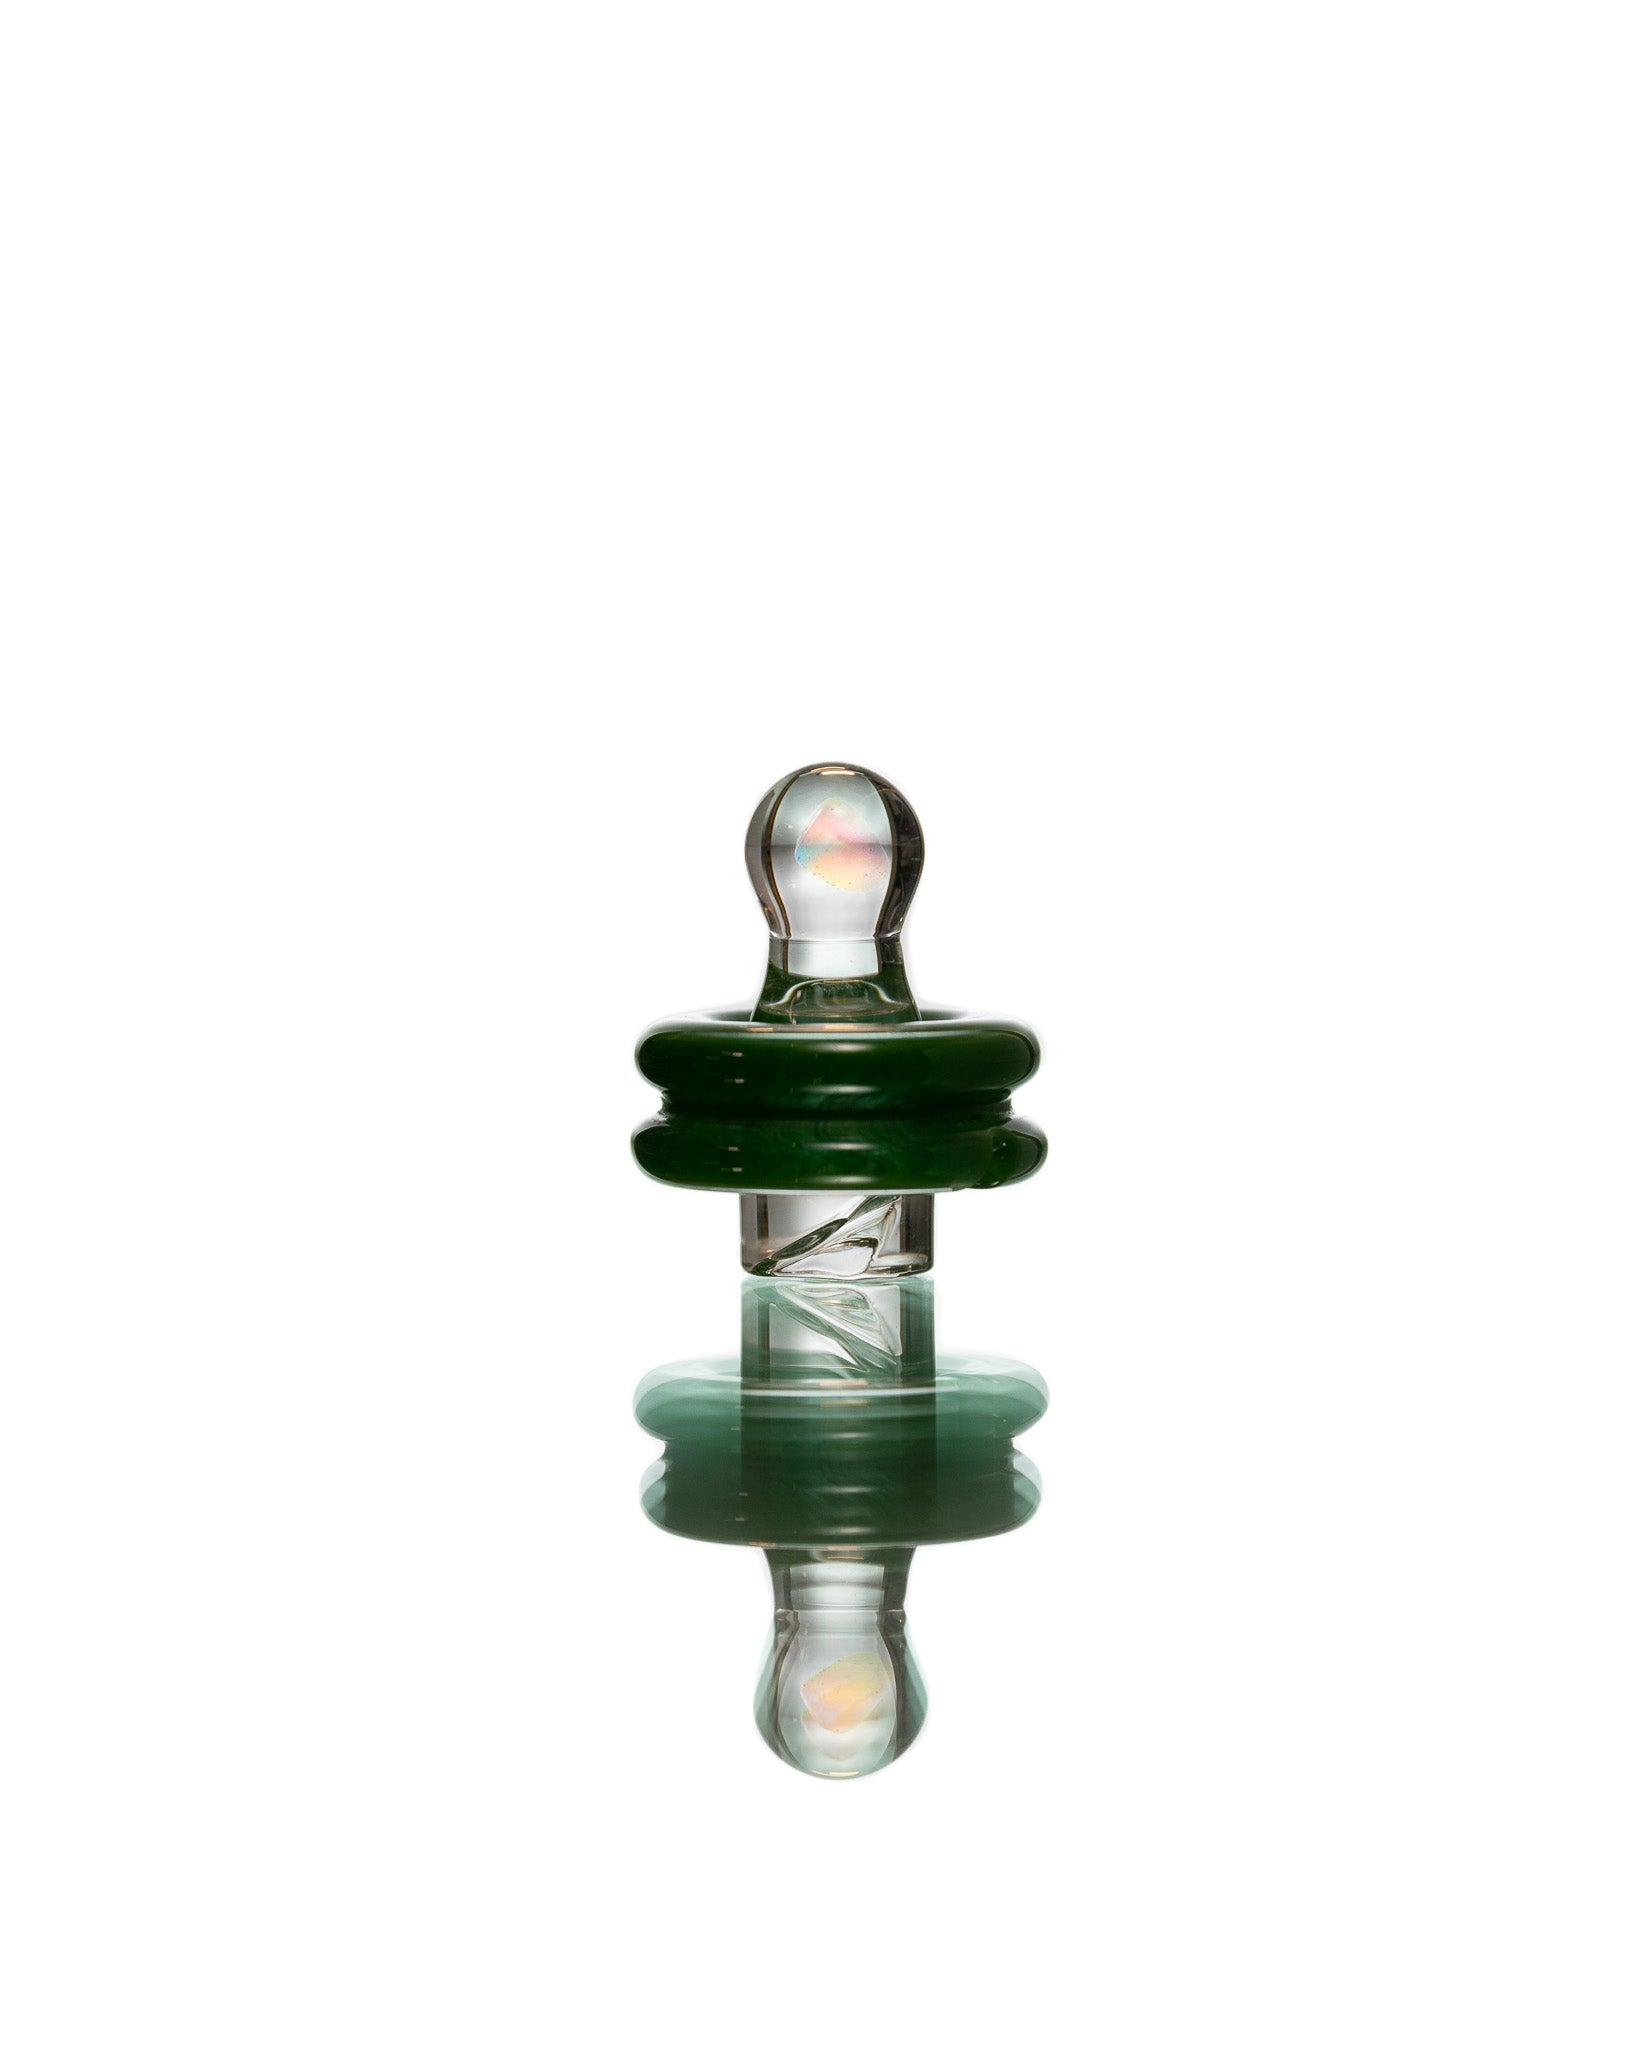 One Trick Pony - "Forrest Green" Opal "Rockulus" Spinner Cap